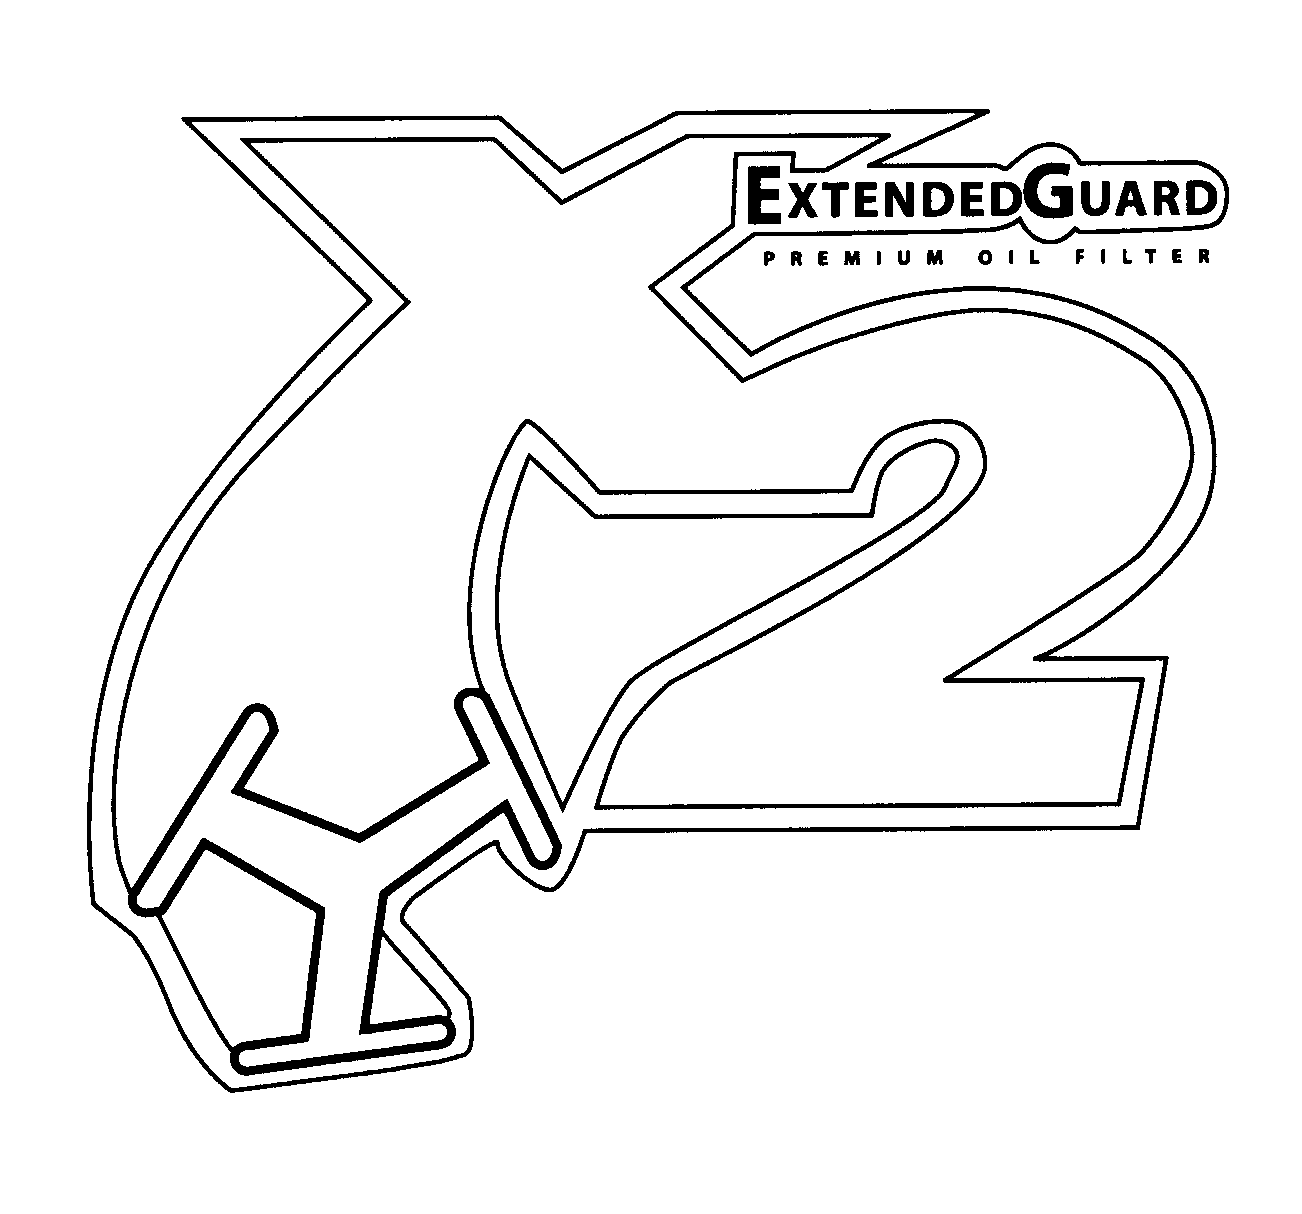  X2 EXTENDED GUARD PREMIUM OIL FILTER